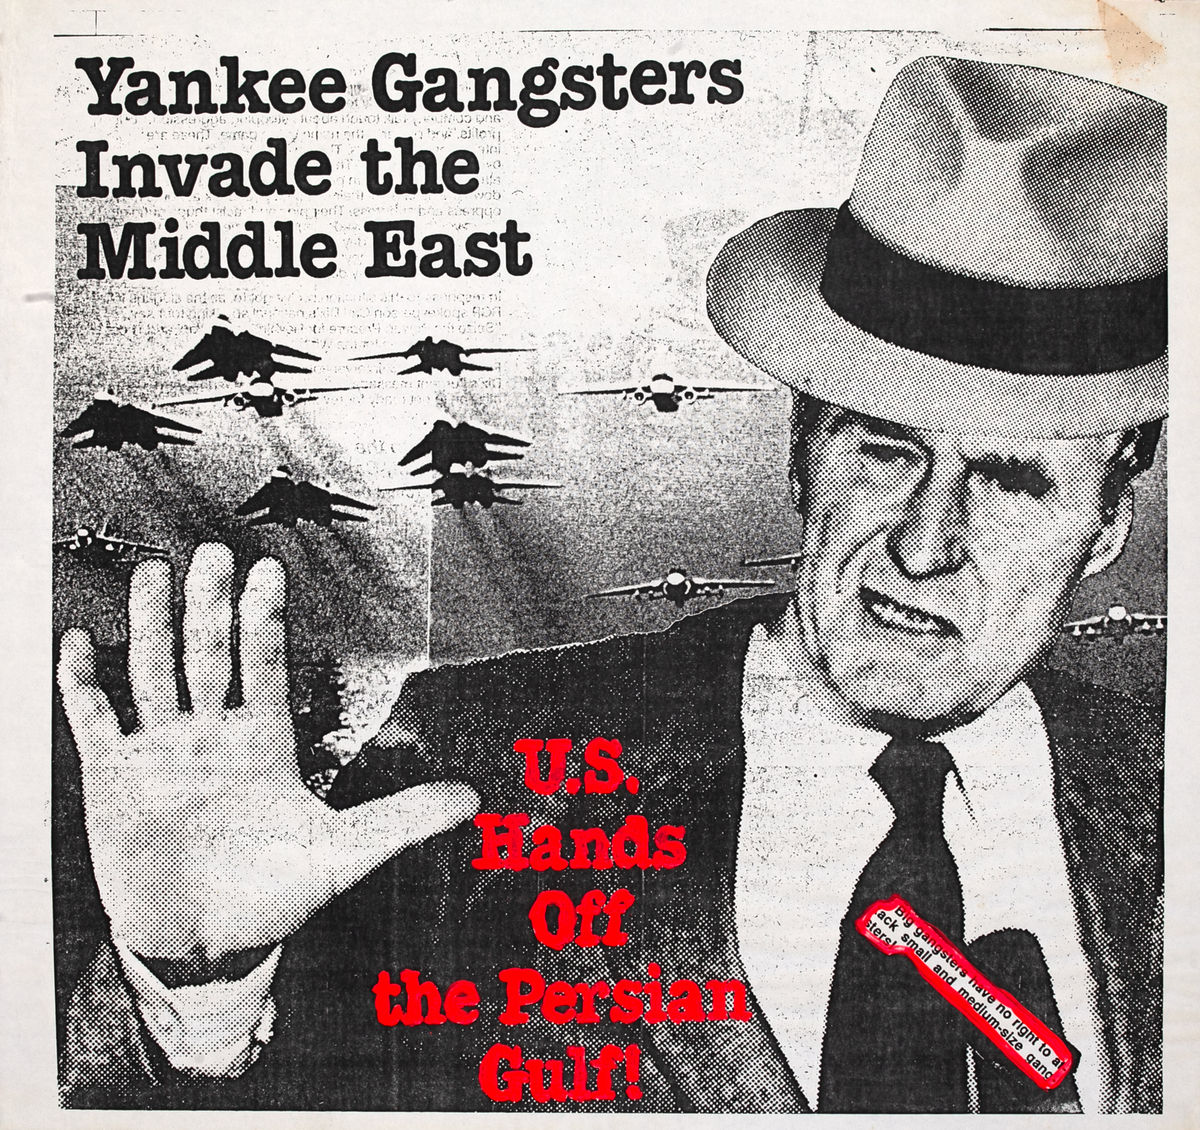 Yankee Gangsters Invade the Middle East Original Gulf War Protest Poster